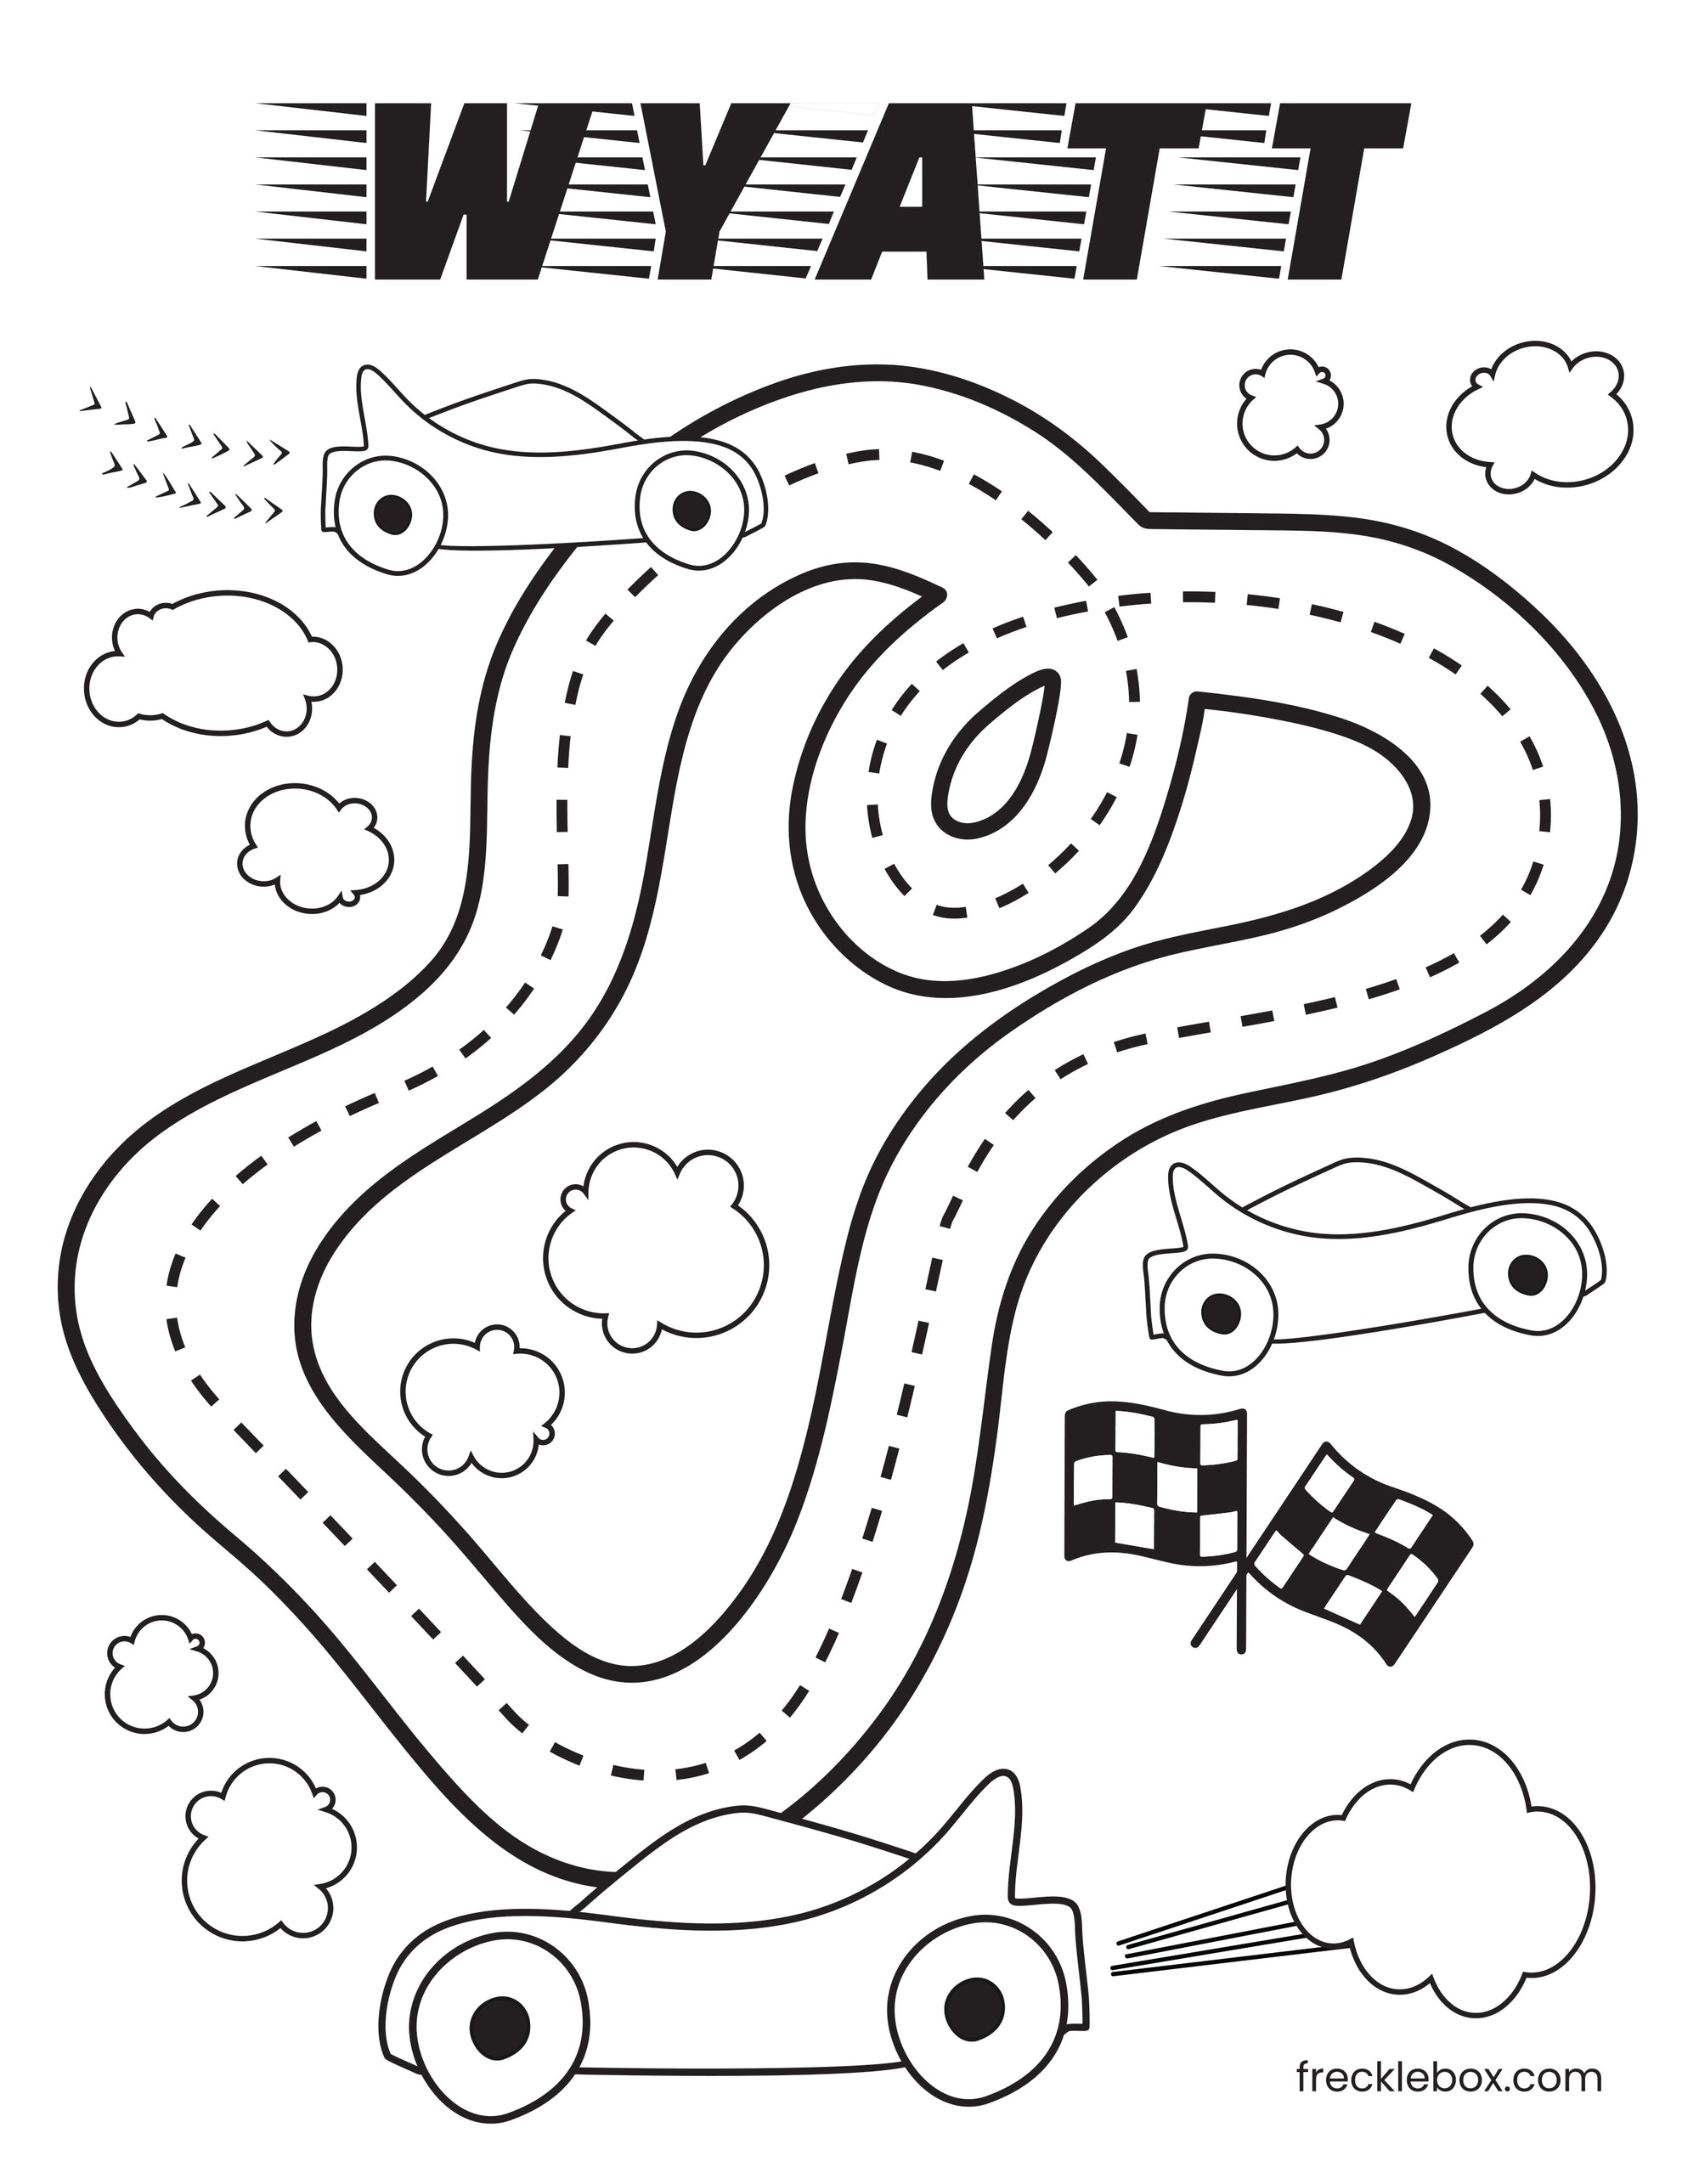 Free coloring page for kids featuring racetrack , cars and child's name.